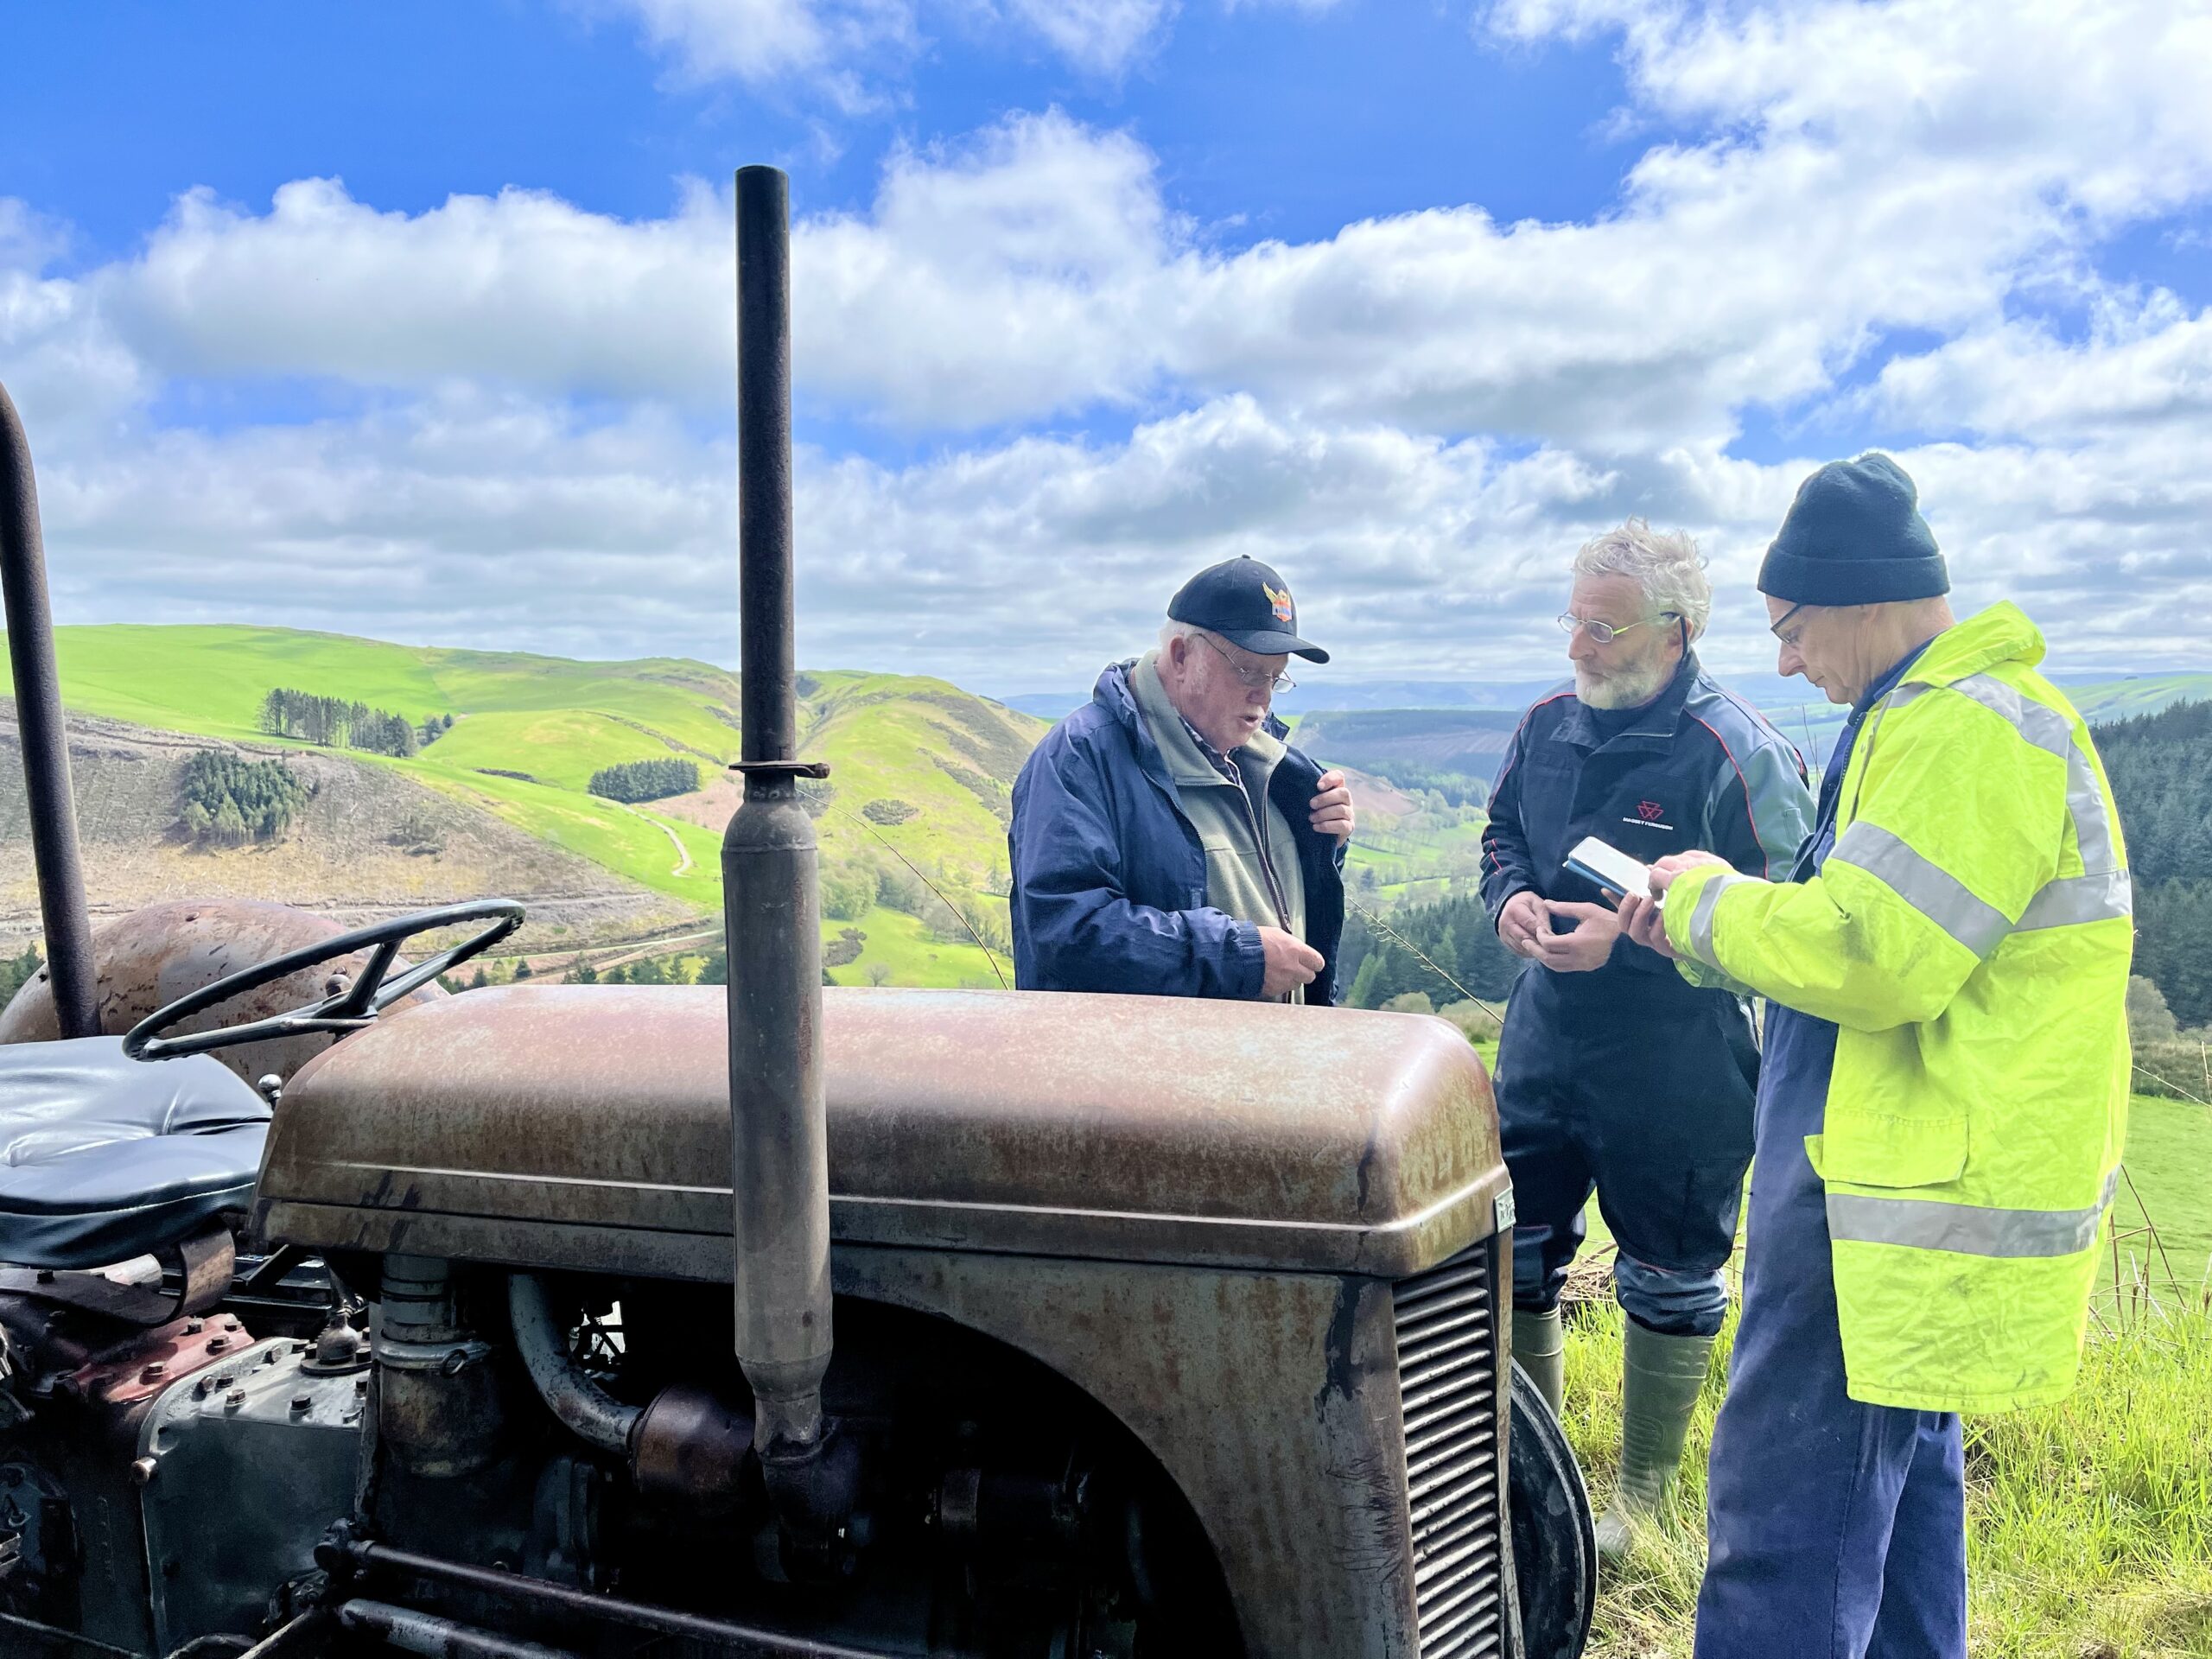 There men talk whilst stood next to old tractor with blue sky clouds and hills in the background.